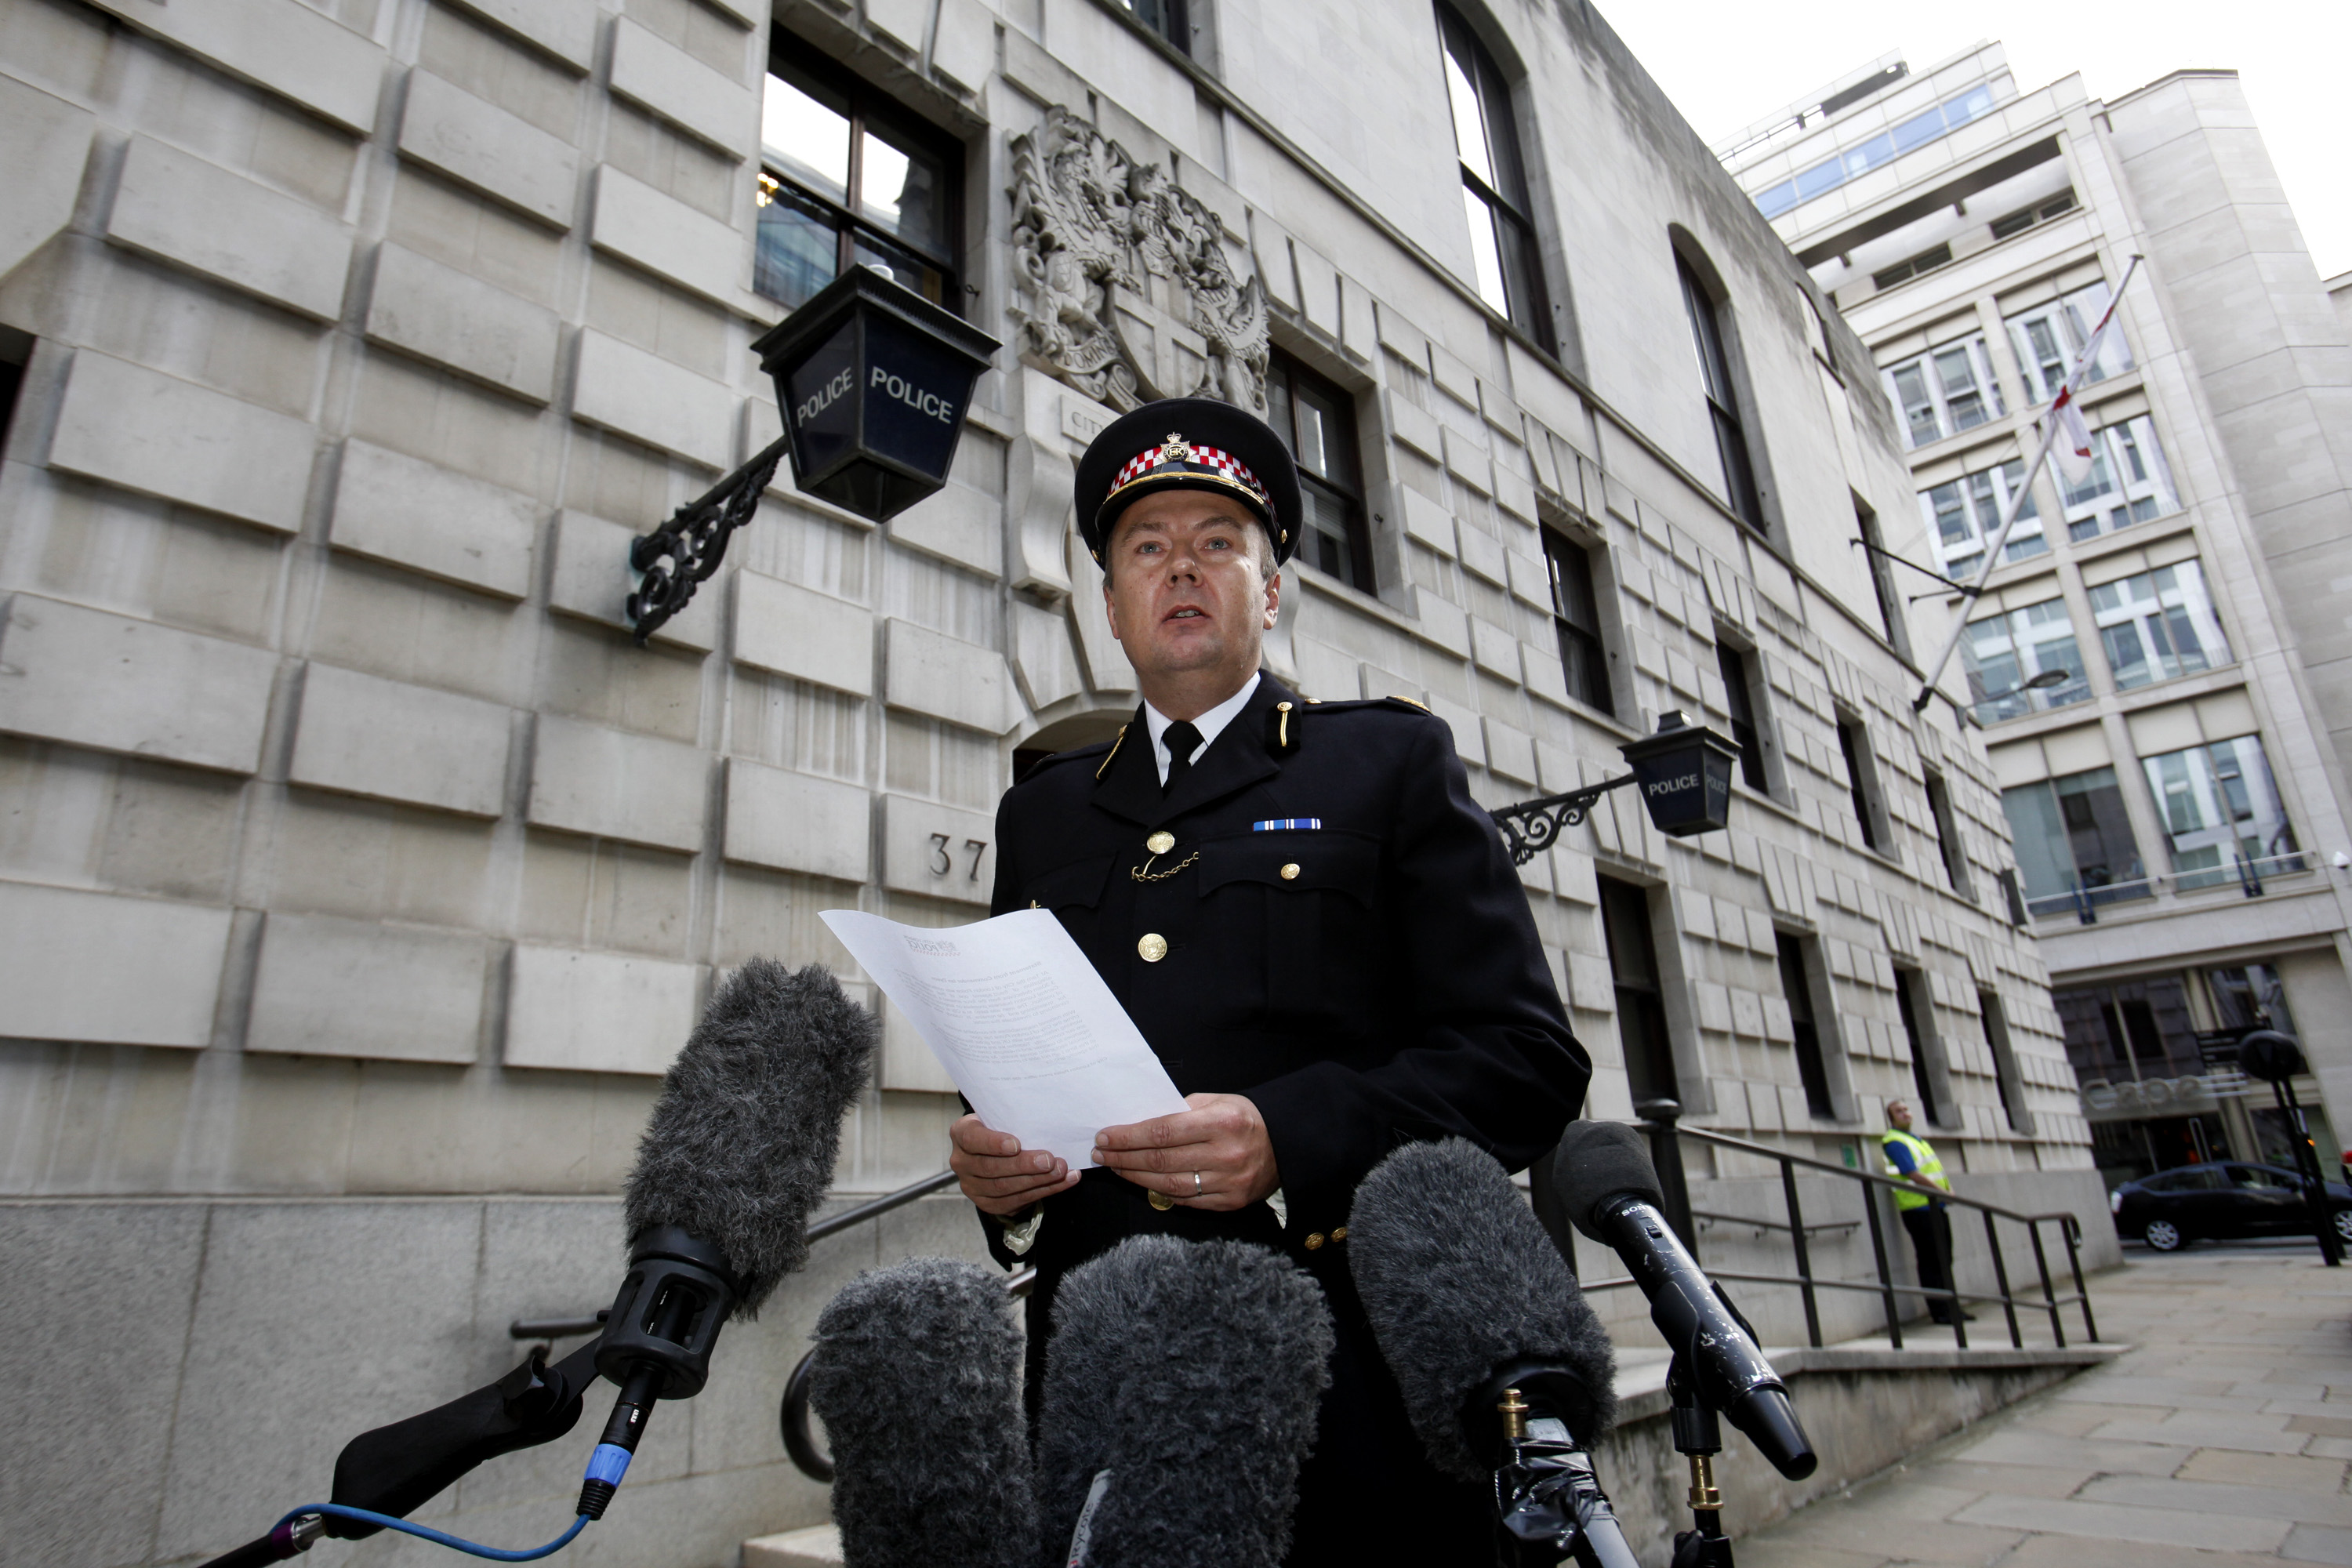 Commander Ian Dyson, of the City of London police, delivers a statement to the media outside Wood Street police station following the arrest of a UBS trader in London, U.K., on Thursday, Sept. 15, 2011. UBS AG, Switzerlands biggest bank, said it may be unprofitable in the third quarter after a $2 billion loss from unauthorized trading at its investment bank. Photographer: Simon Dawson/Bloomberg *** Local Caption *** Ian Dyson